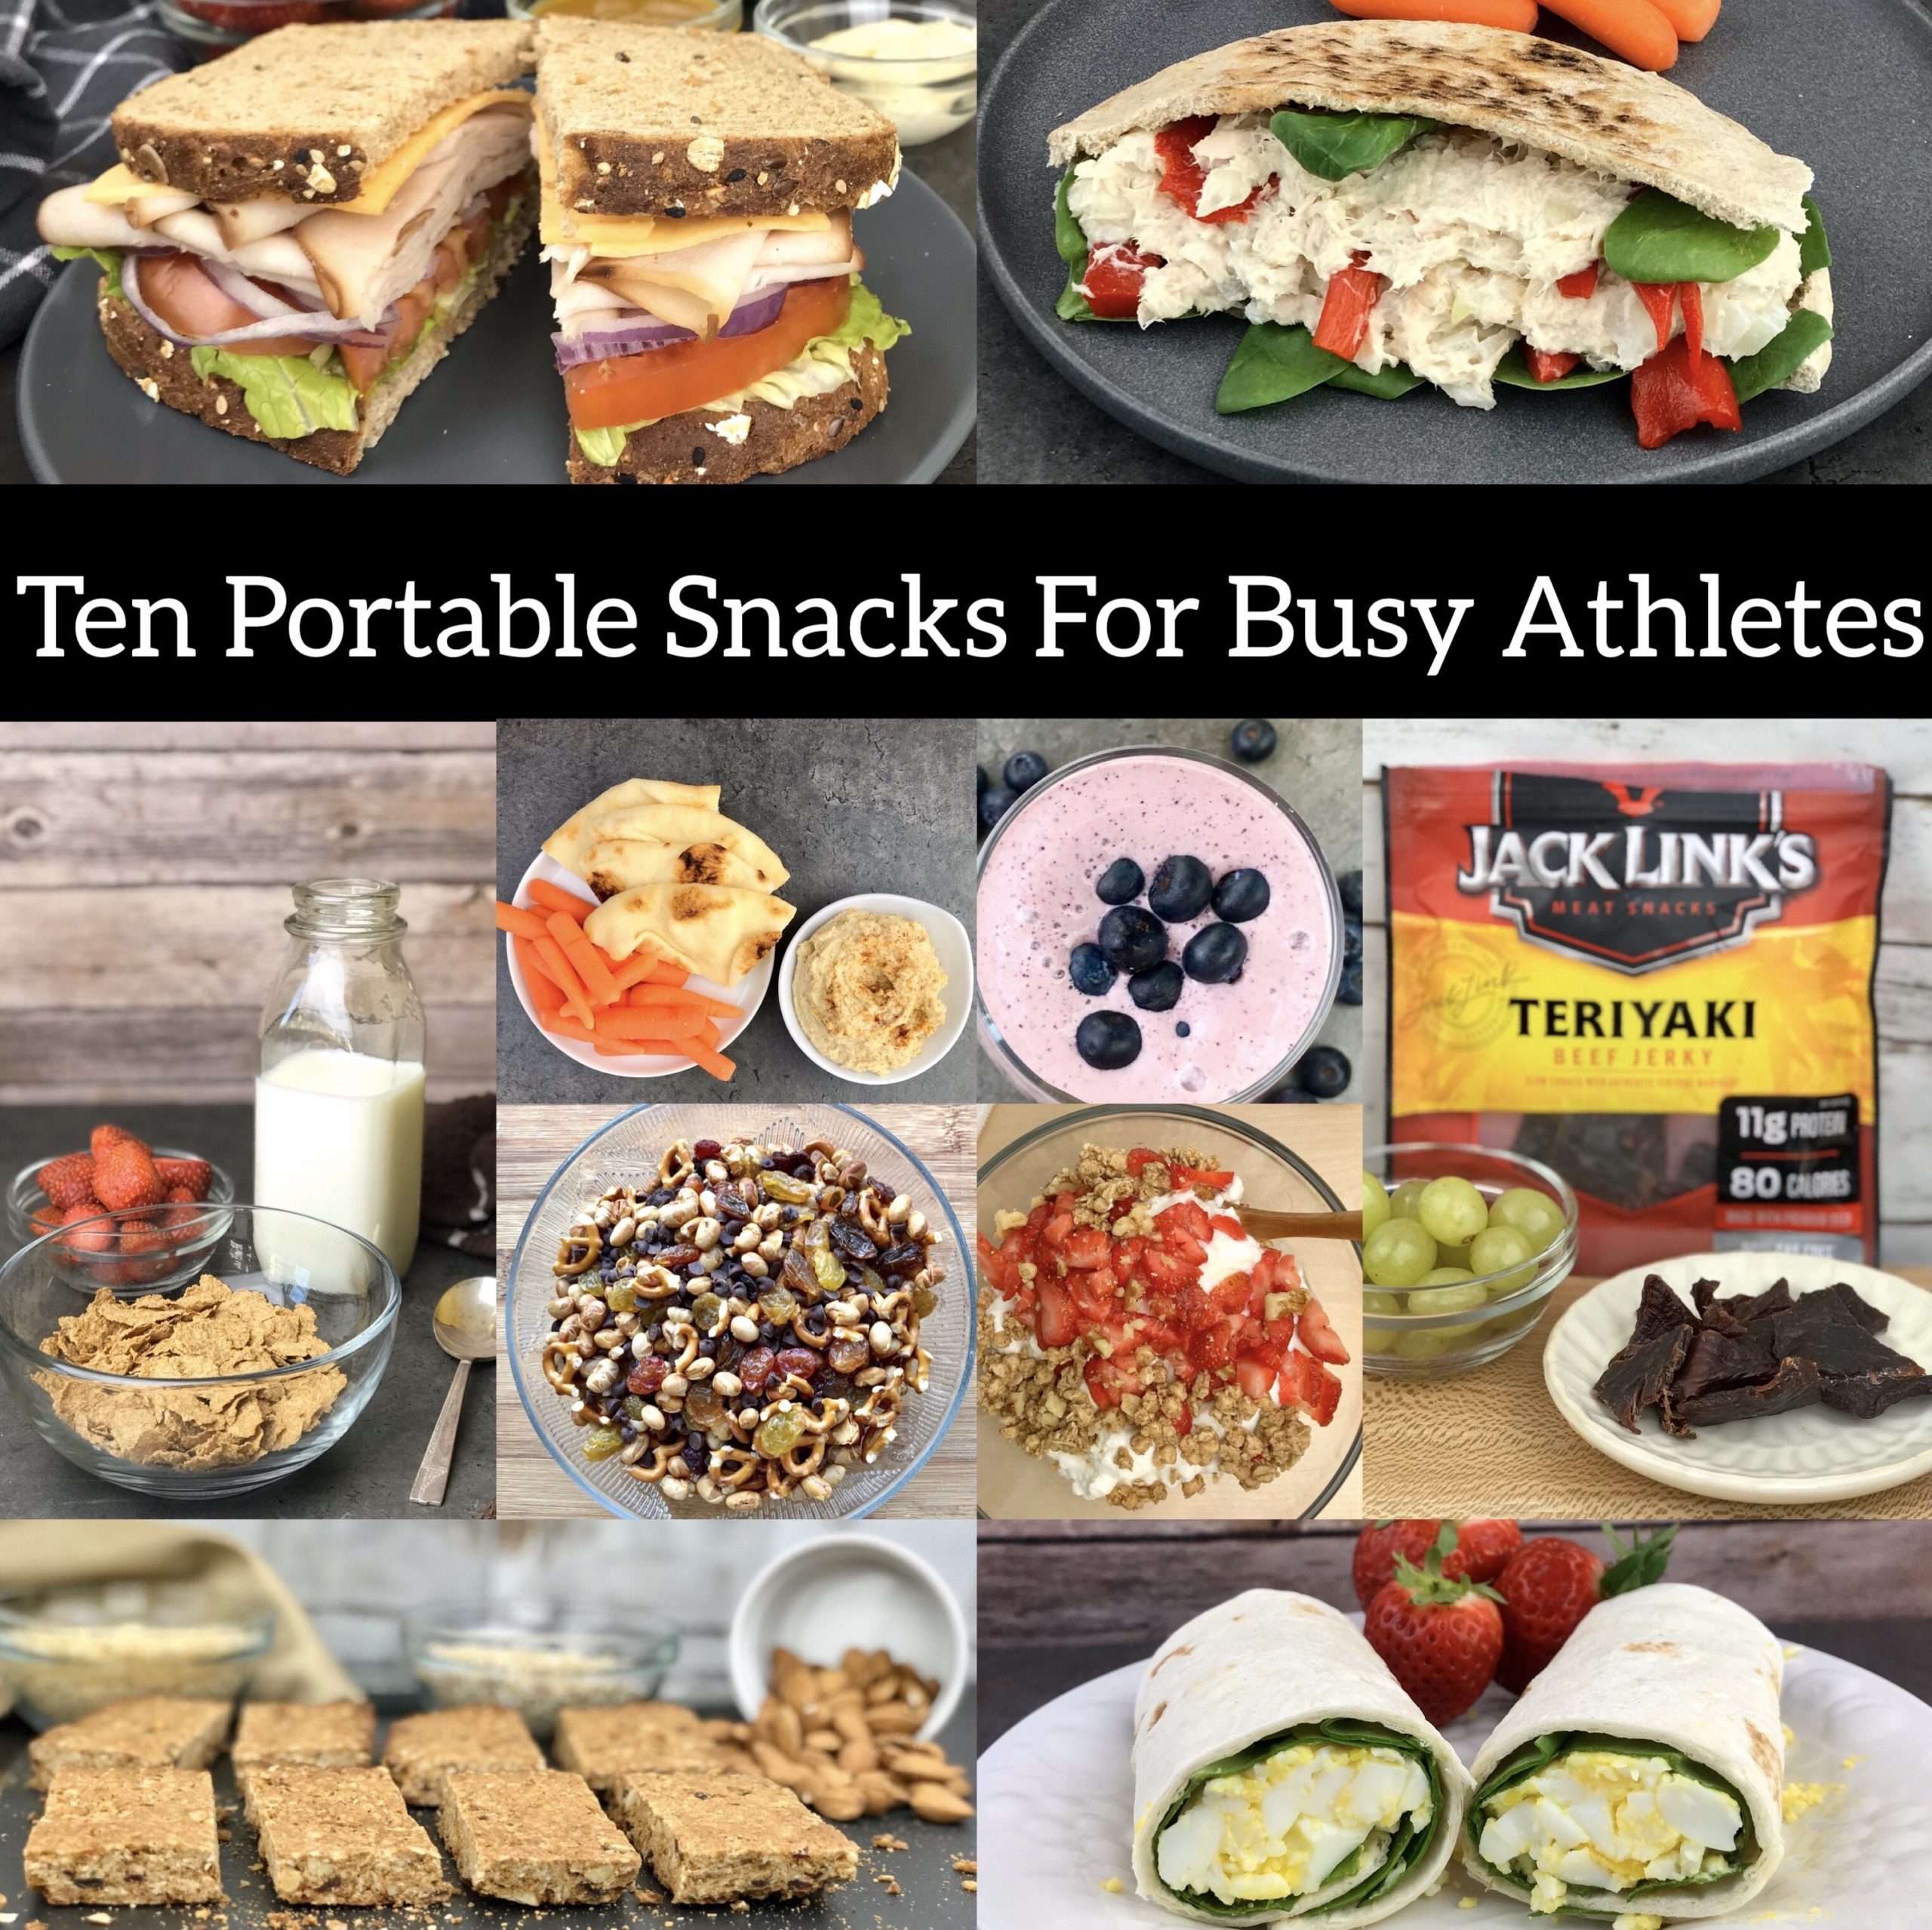 Recipes for healthy sports snacks